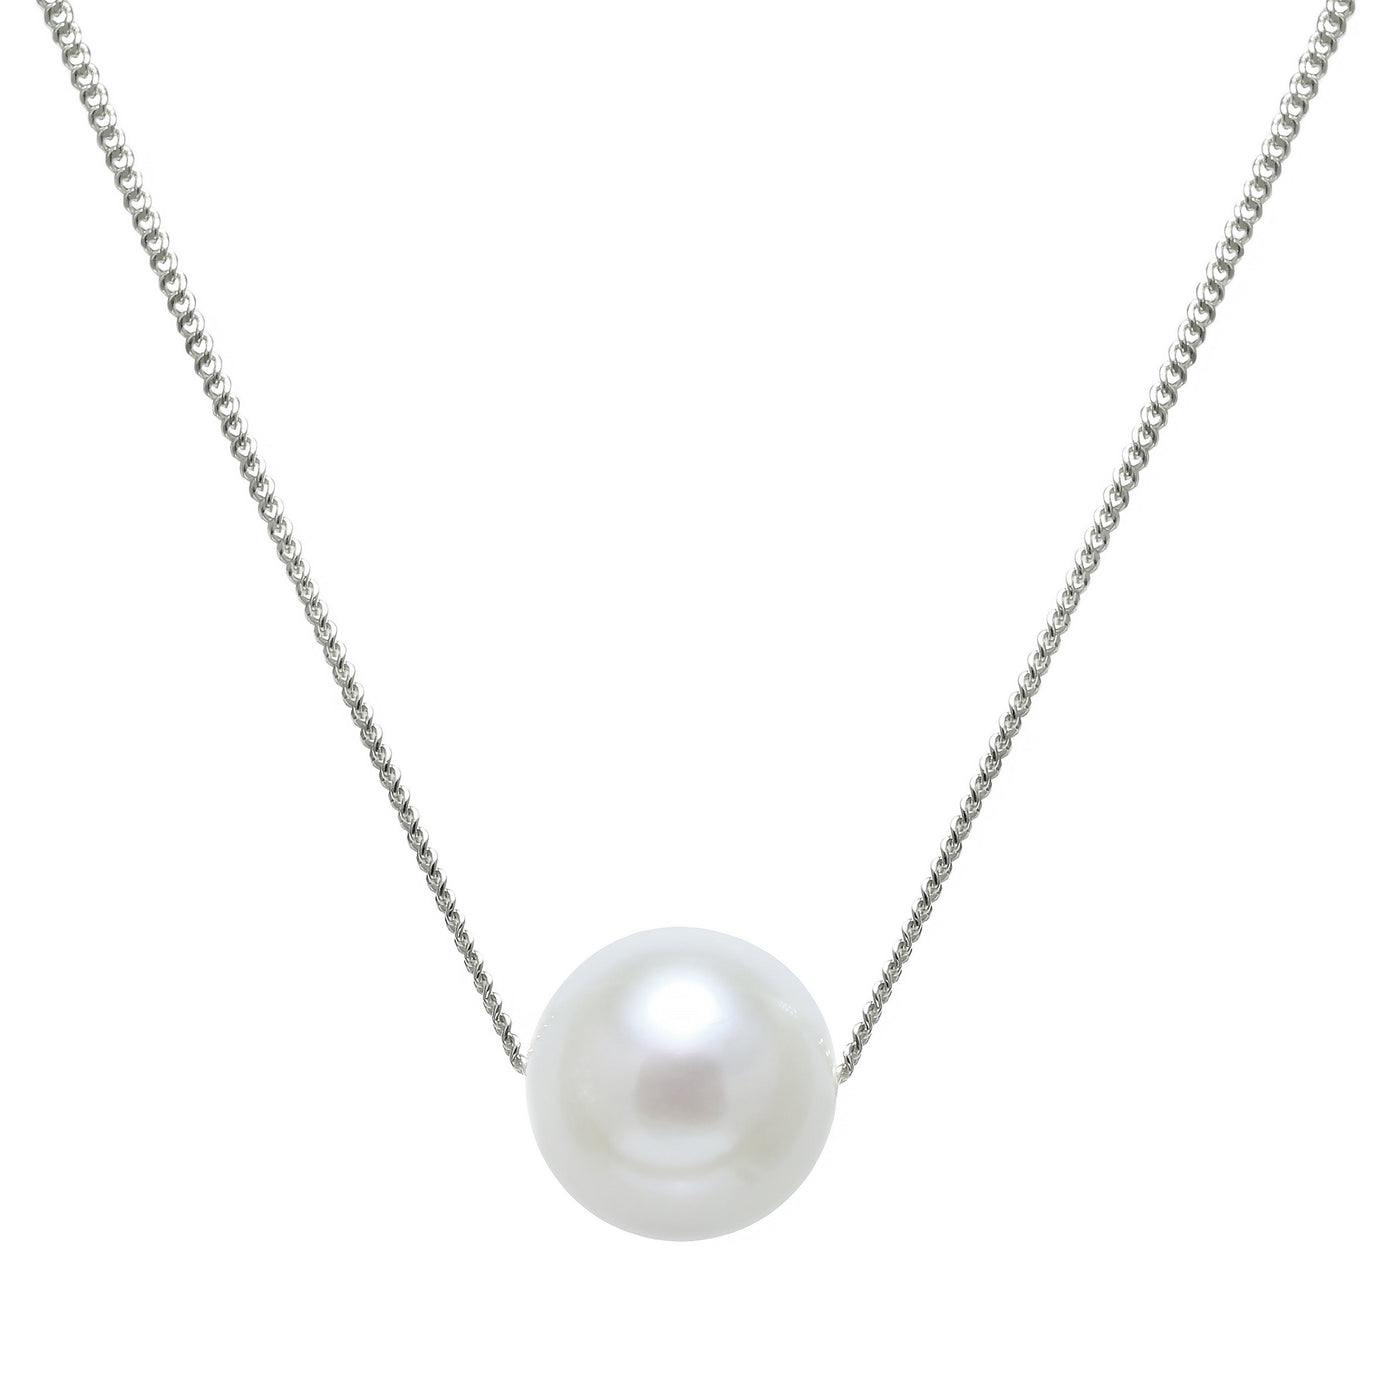 9.5mm White Cultured Pearl Sterling Silver Necklace